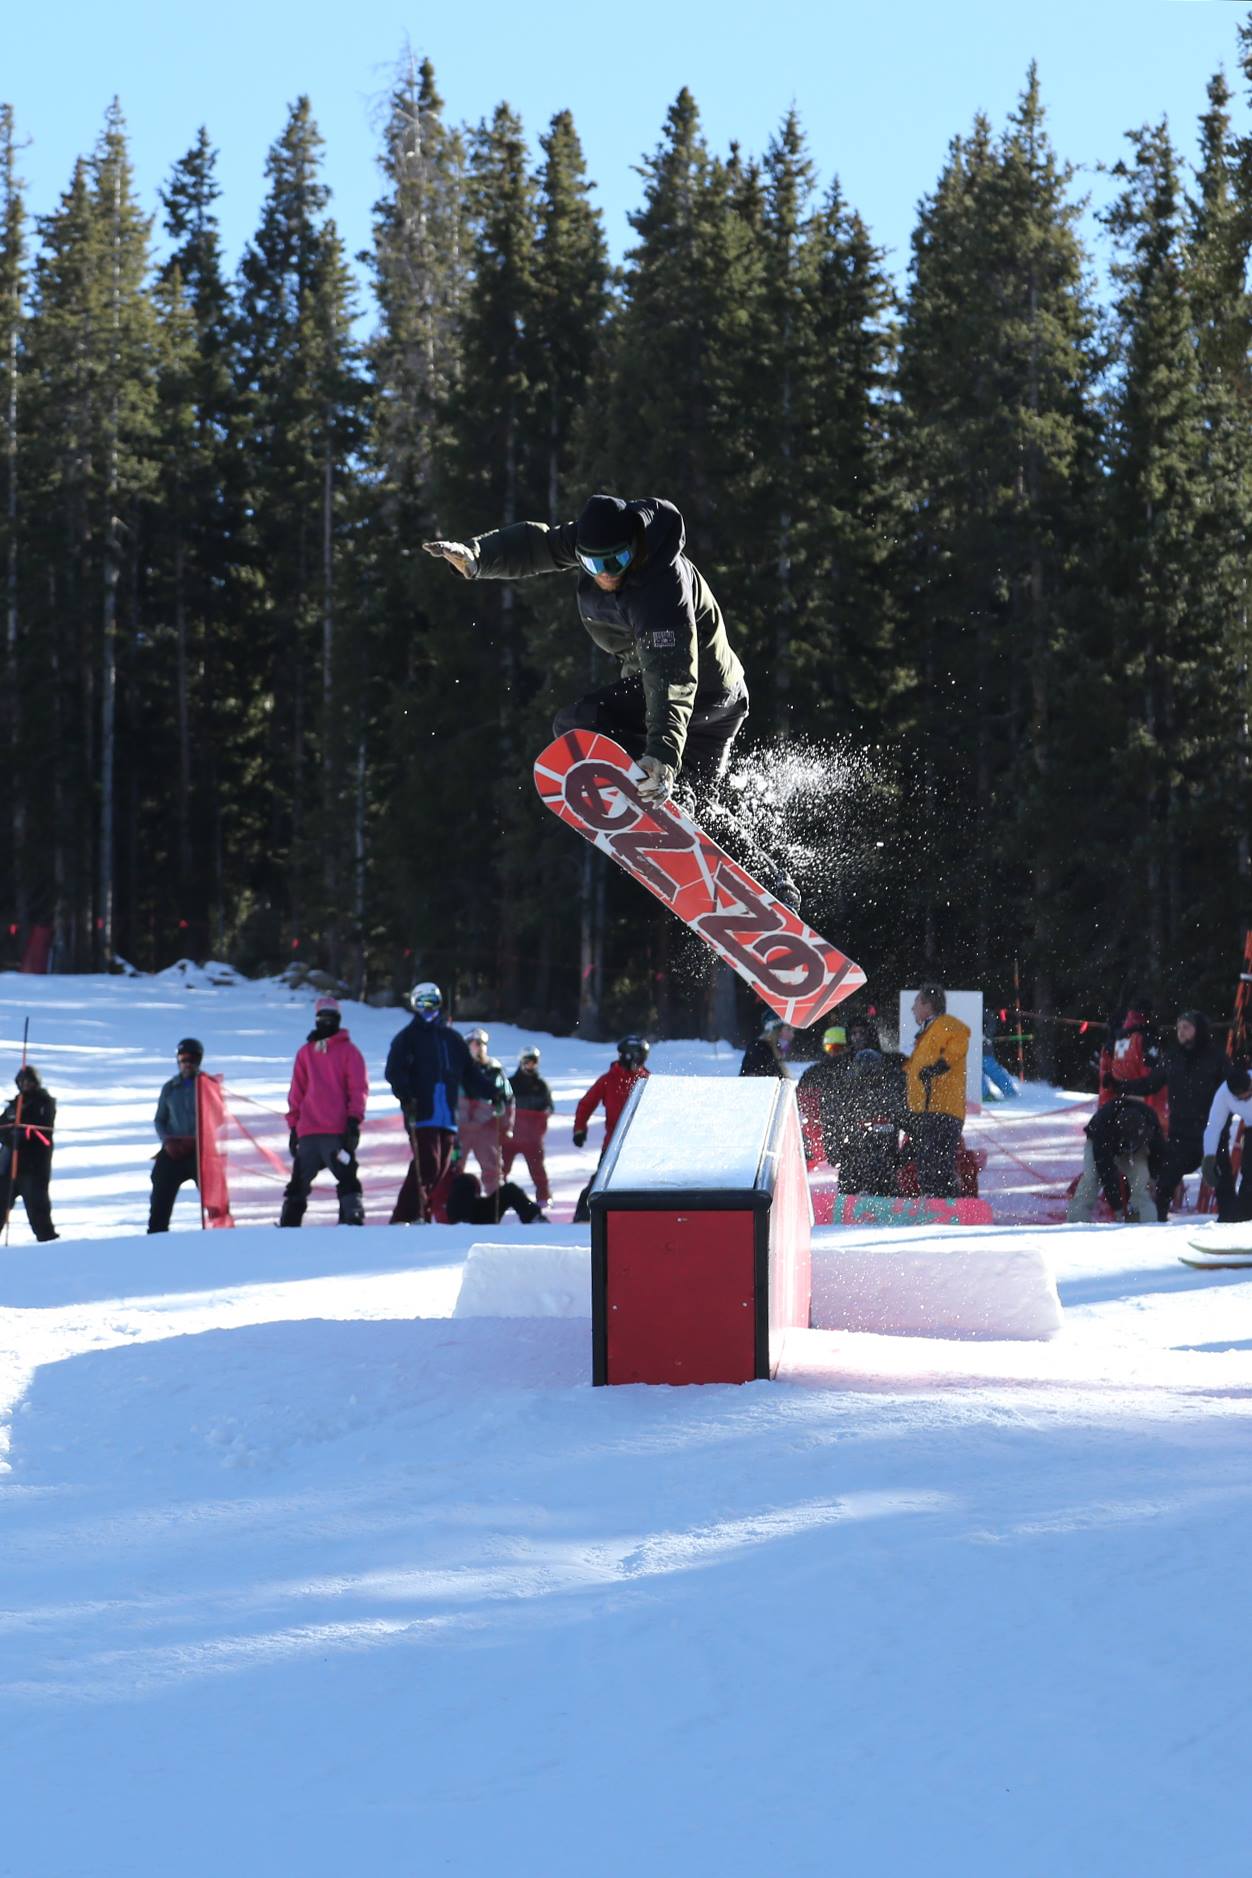 Loveland had a sick opening weekend! PC: Thom Paxton Photography